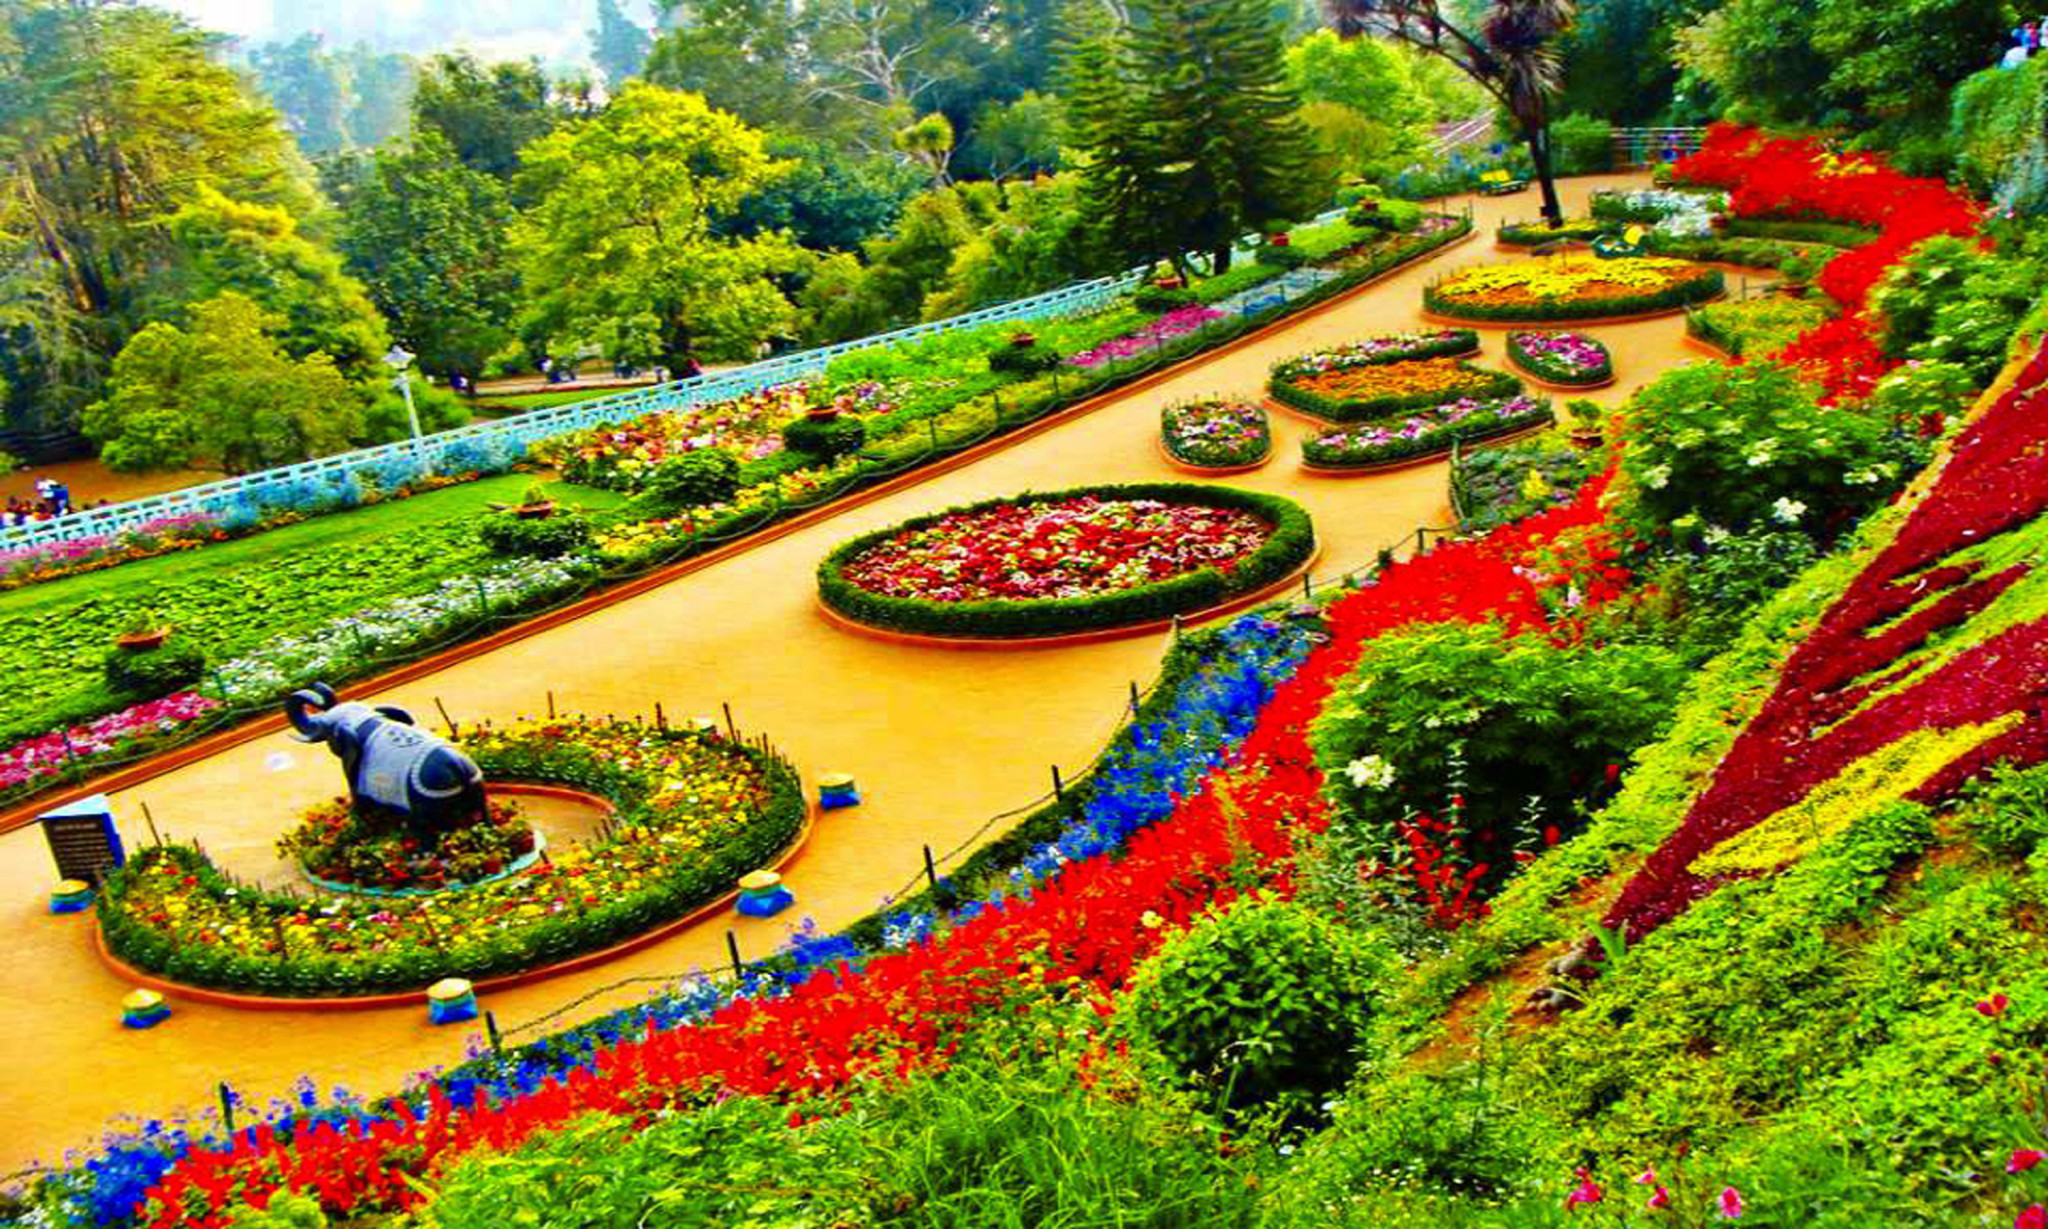 famous gardens in india - astounding design and aesthetic richness